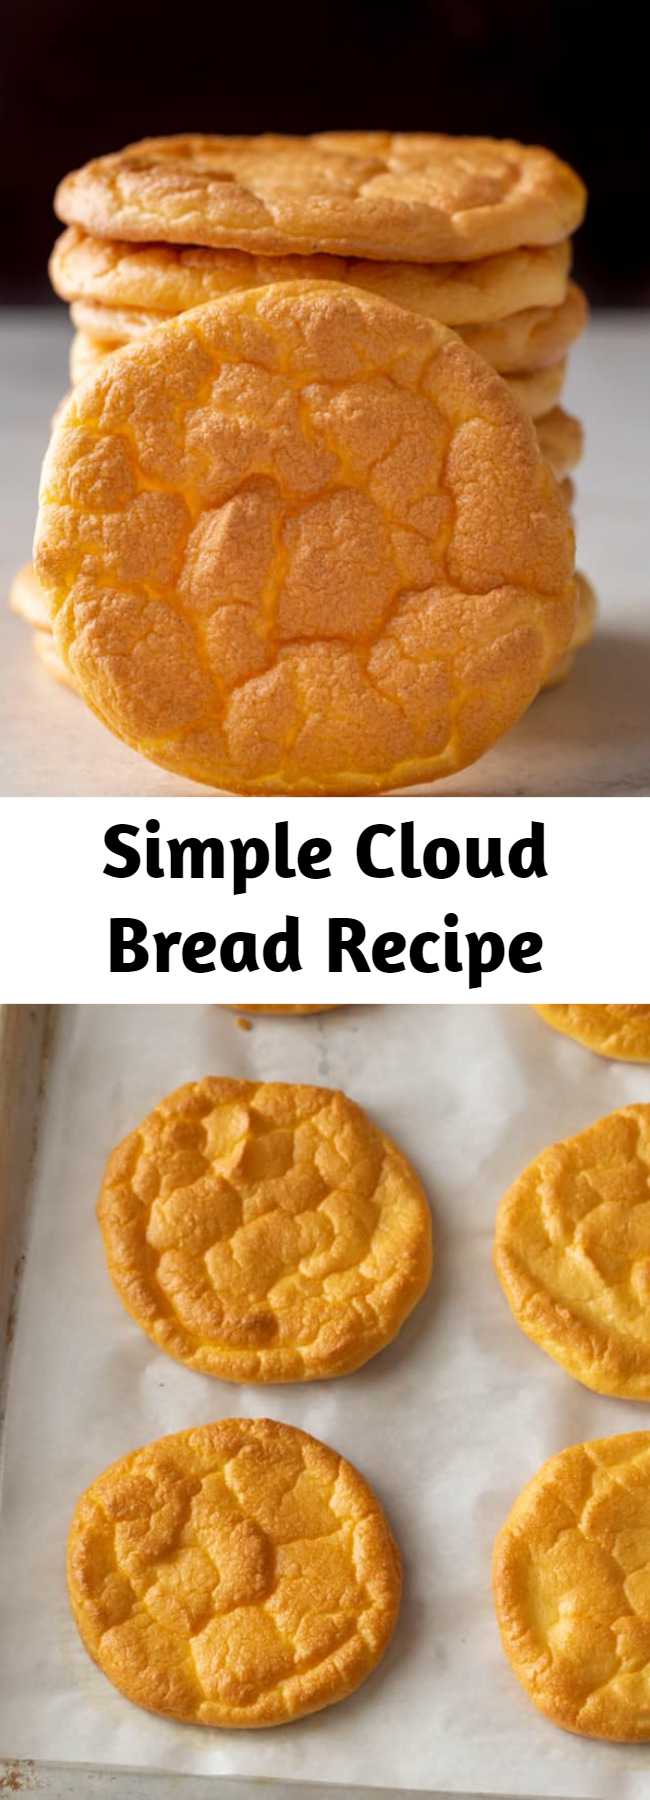 Simple Cloud Bread Recipe - This simple cloud bread recipe is a low carb, keto friendly option that is light, fluffy, and great for sandwiches. #bread #baking #lowcarb #keto #glutenfree